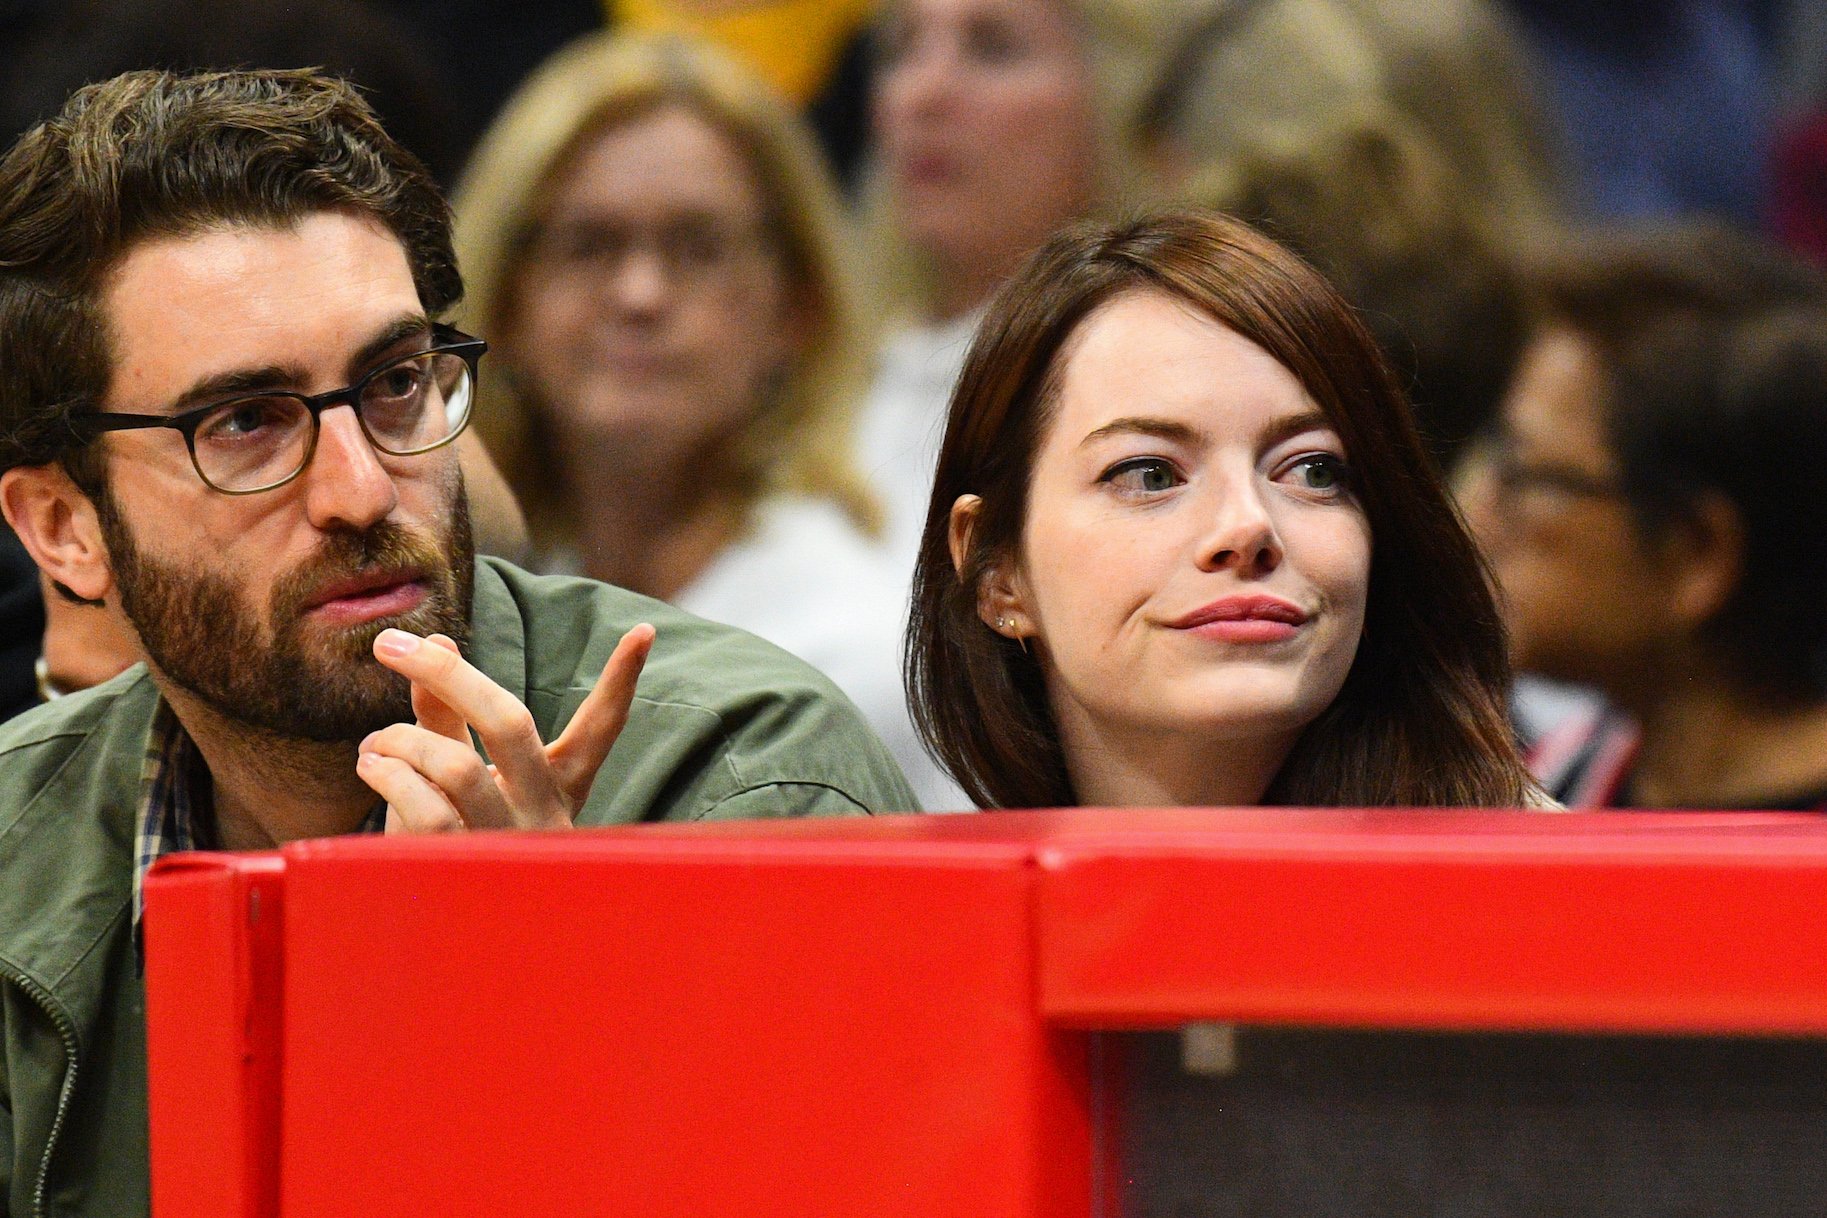 Emma Stone's Husband: Who Is Dave McCary?